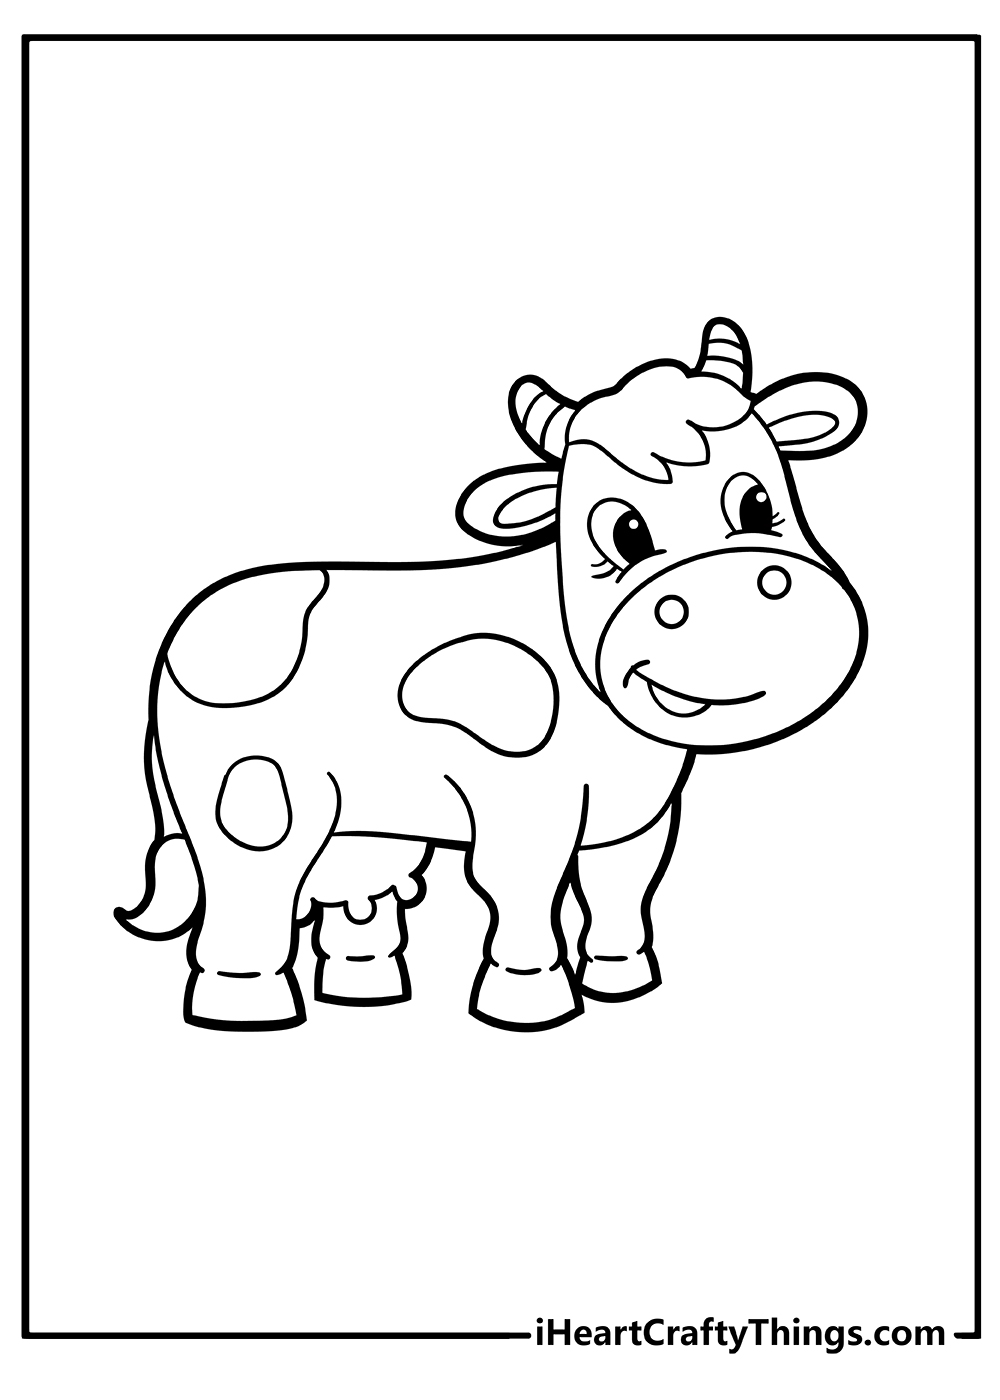 Cow Coloring Pages free download